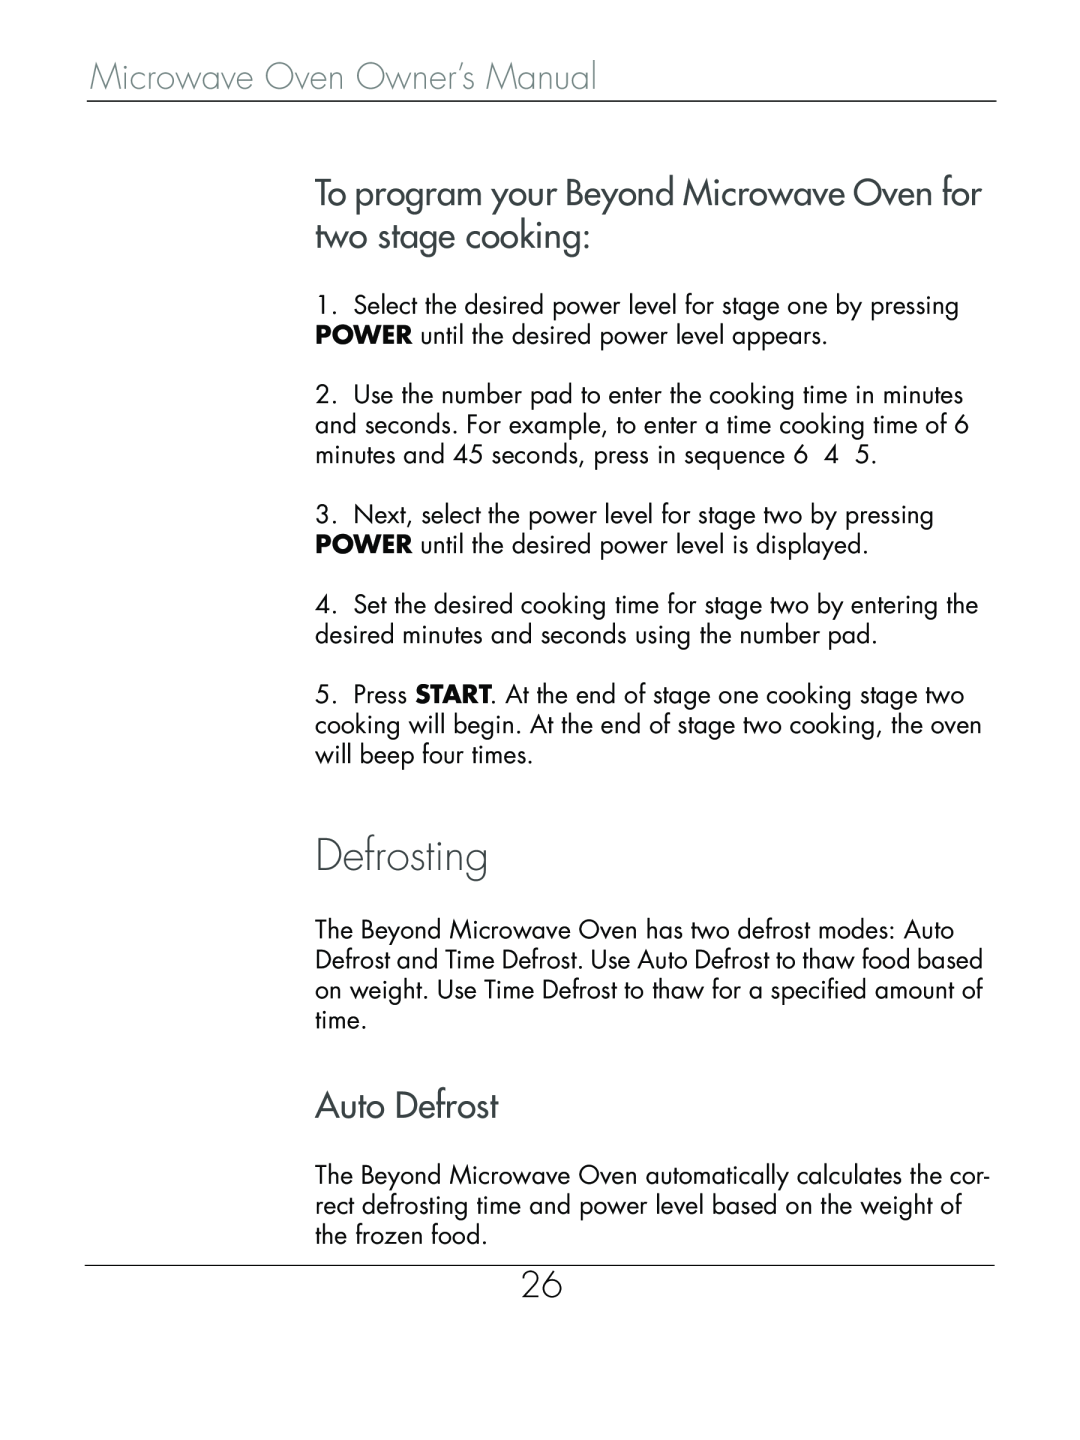 Beyond Microwace Oven manual Defrosting, To program your Beyond Microwave Oven for two stage cooking, Auto Defrost 